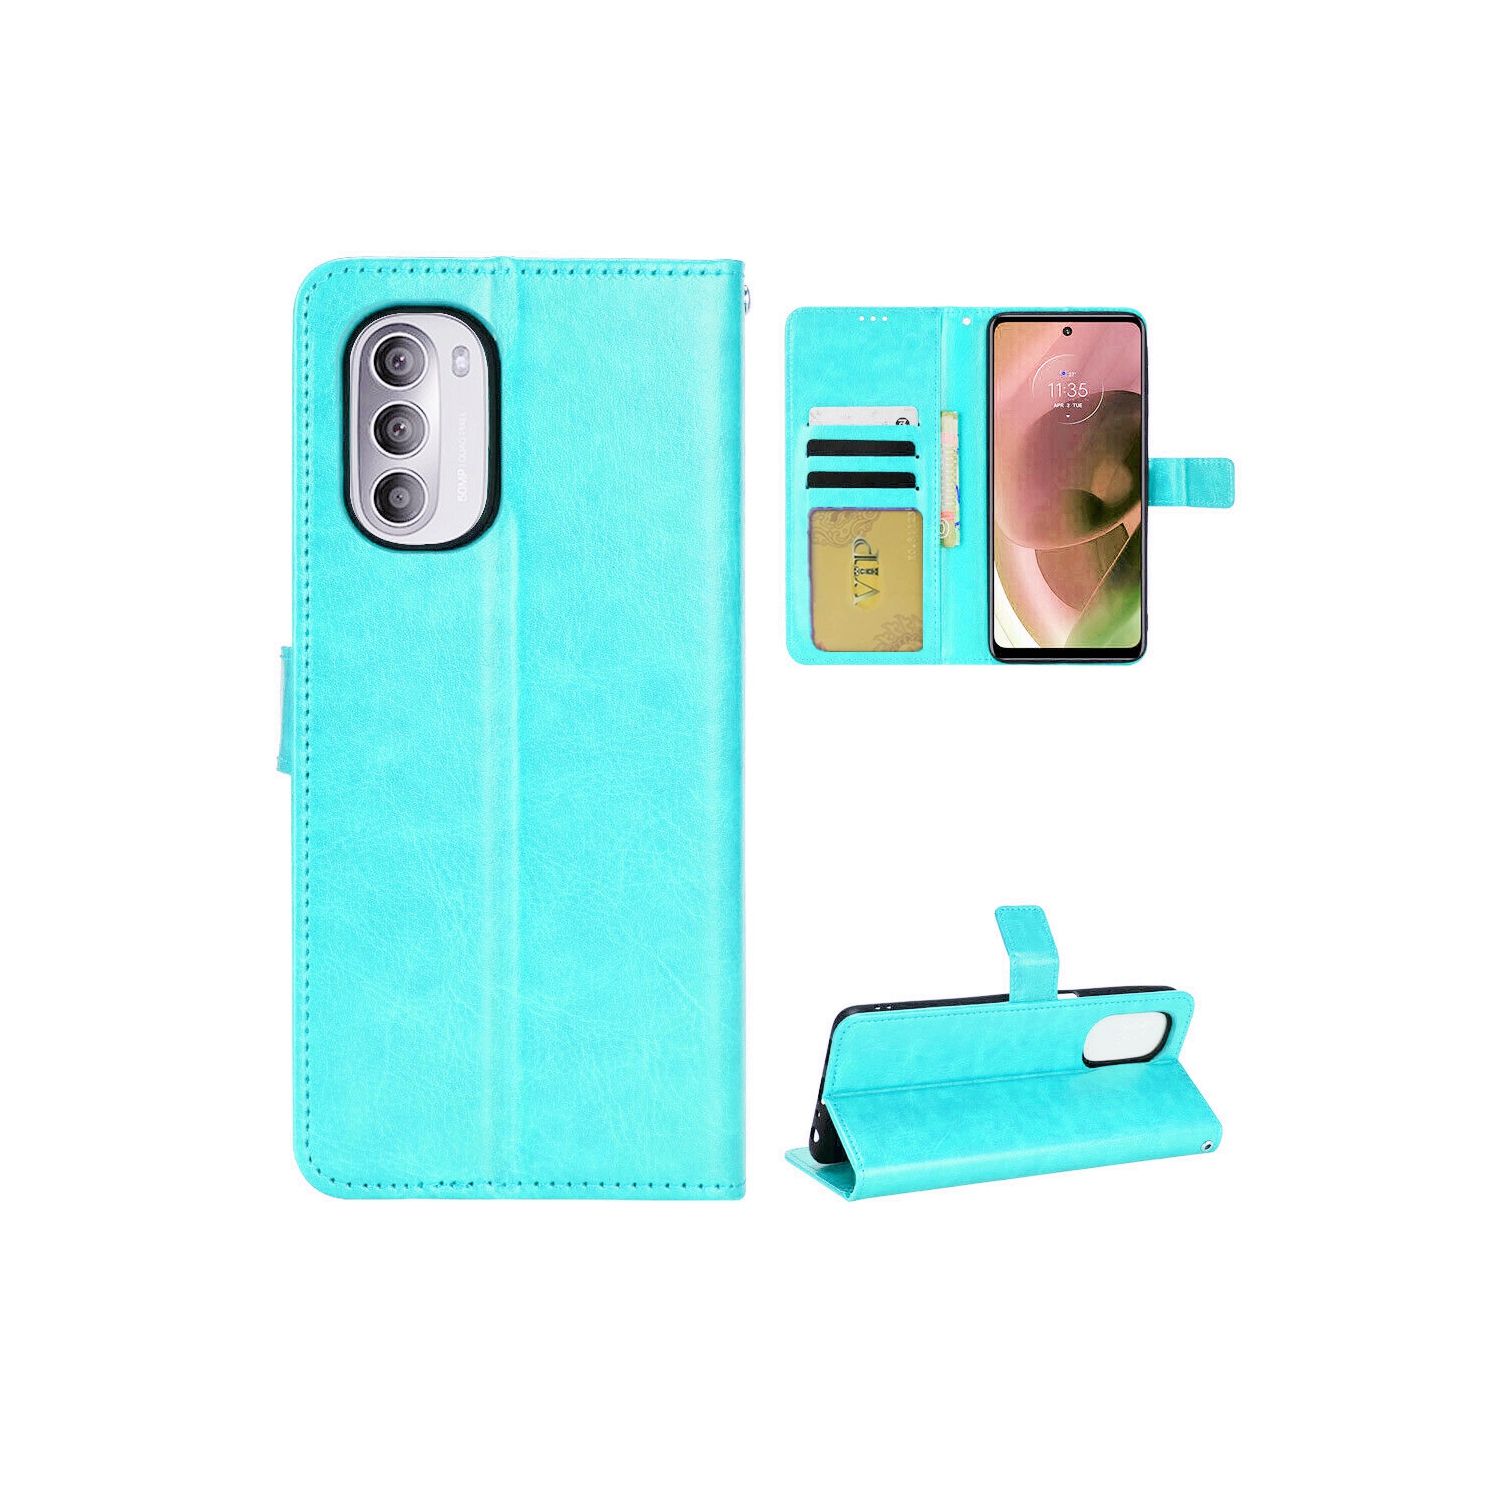 [CS] Motorola Moto G Stylus 5G 2022 Case, Magnetic Leather Folio Wallet Flip Case Cover with Card Slot, Teal